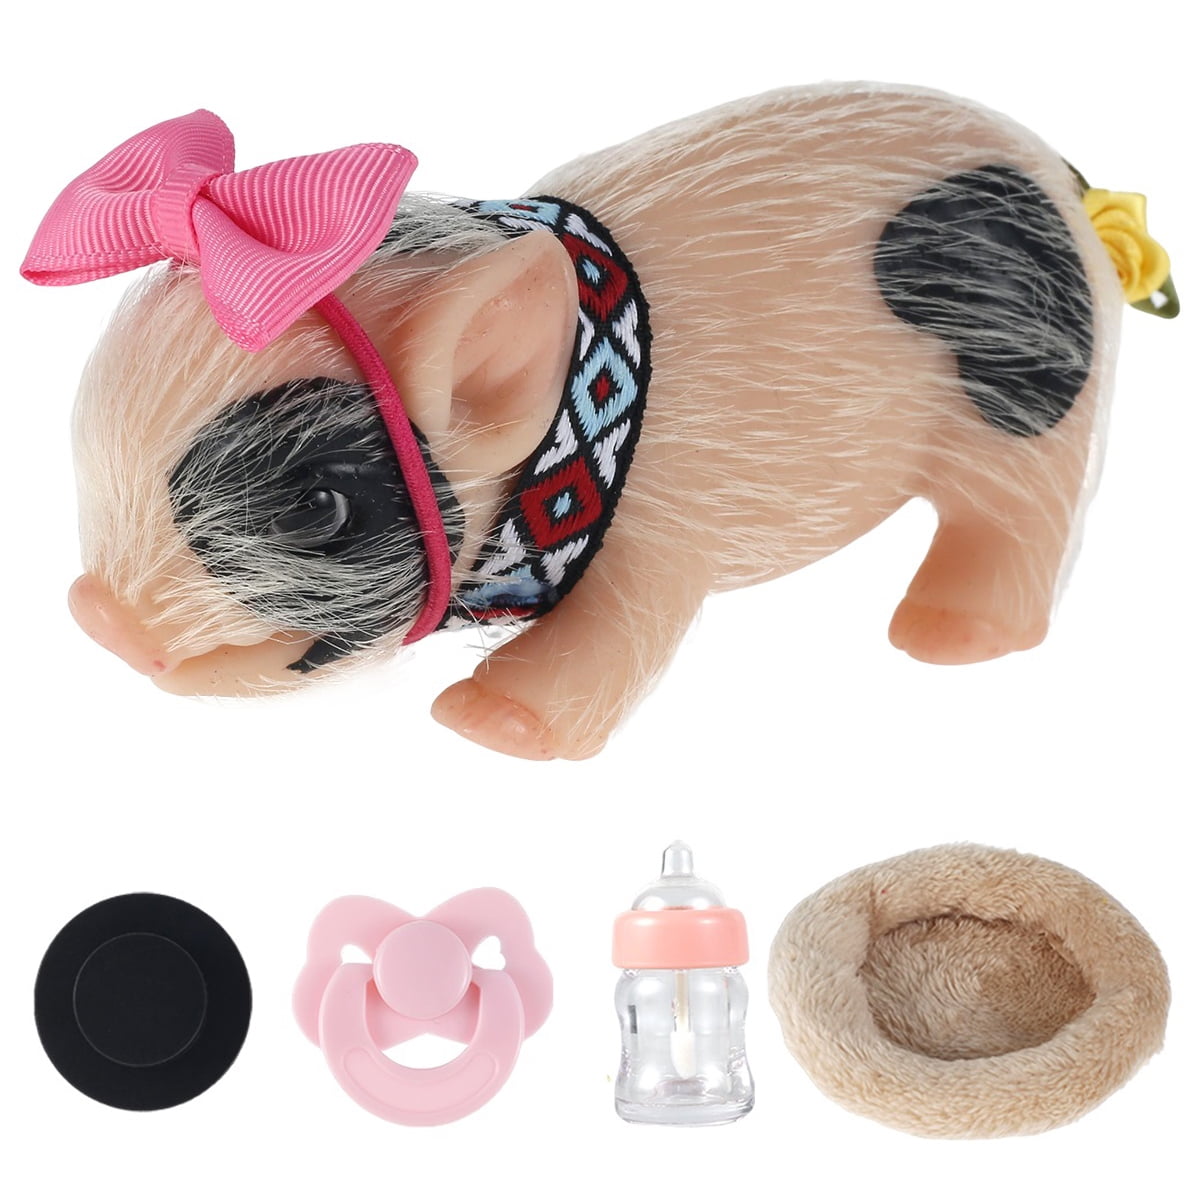 Eummy Silicone Pig Mini Silicone Animals Pig Set,5 Inch Pig Toys for  Girls&Boys, Realistic Cute Baby Piggy Doll Soft Body, Best Gifts for Kids,  Her